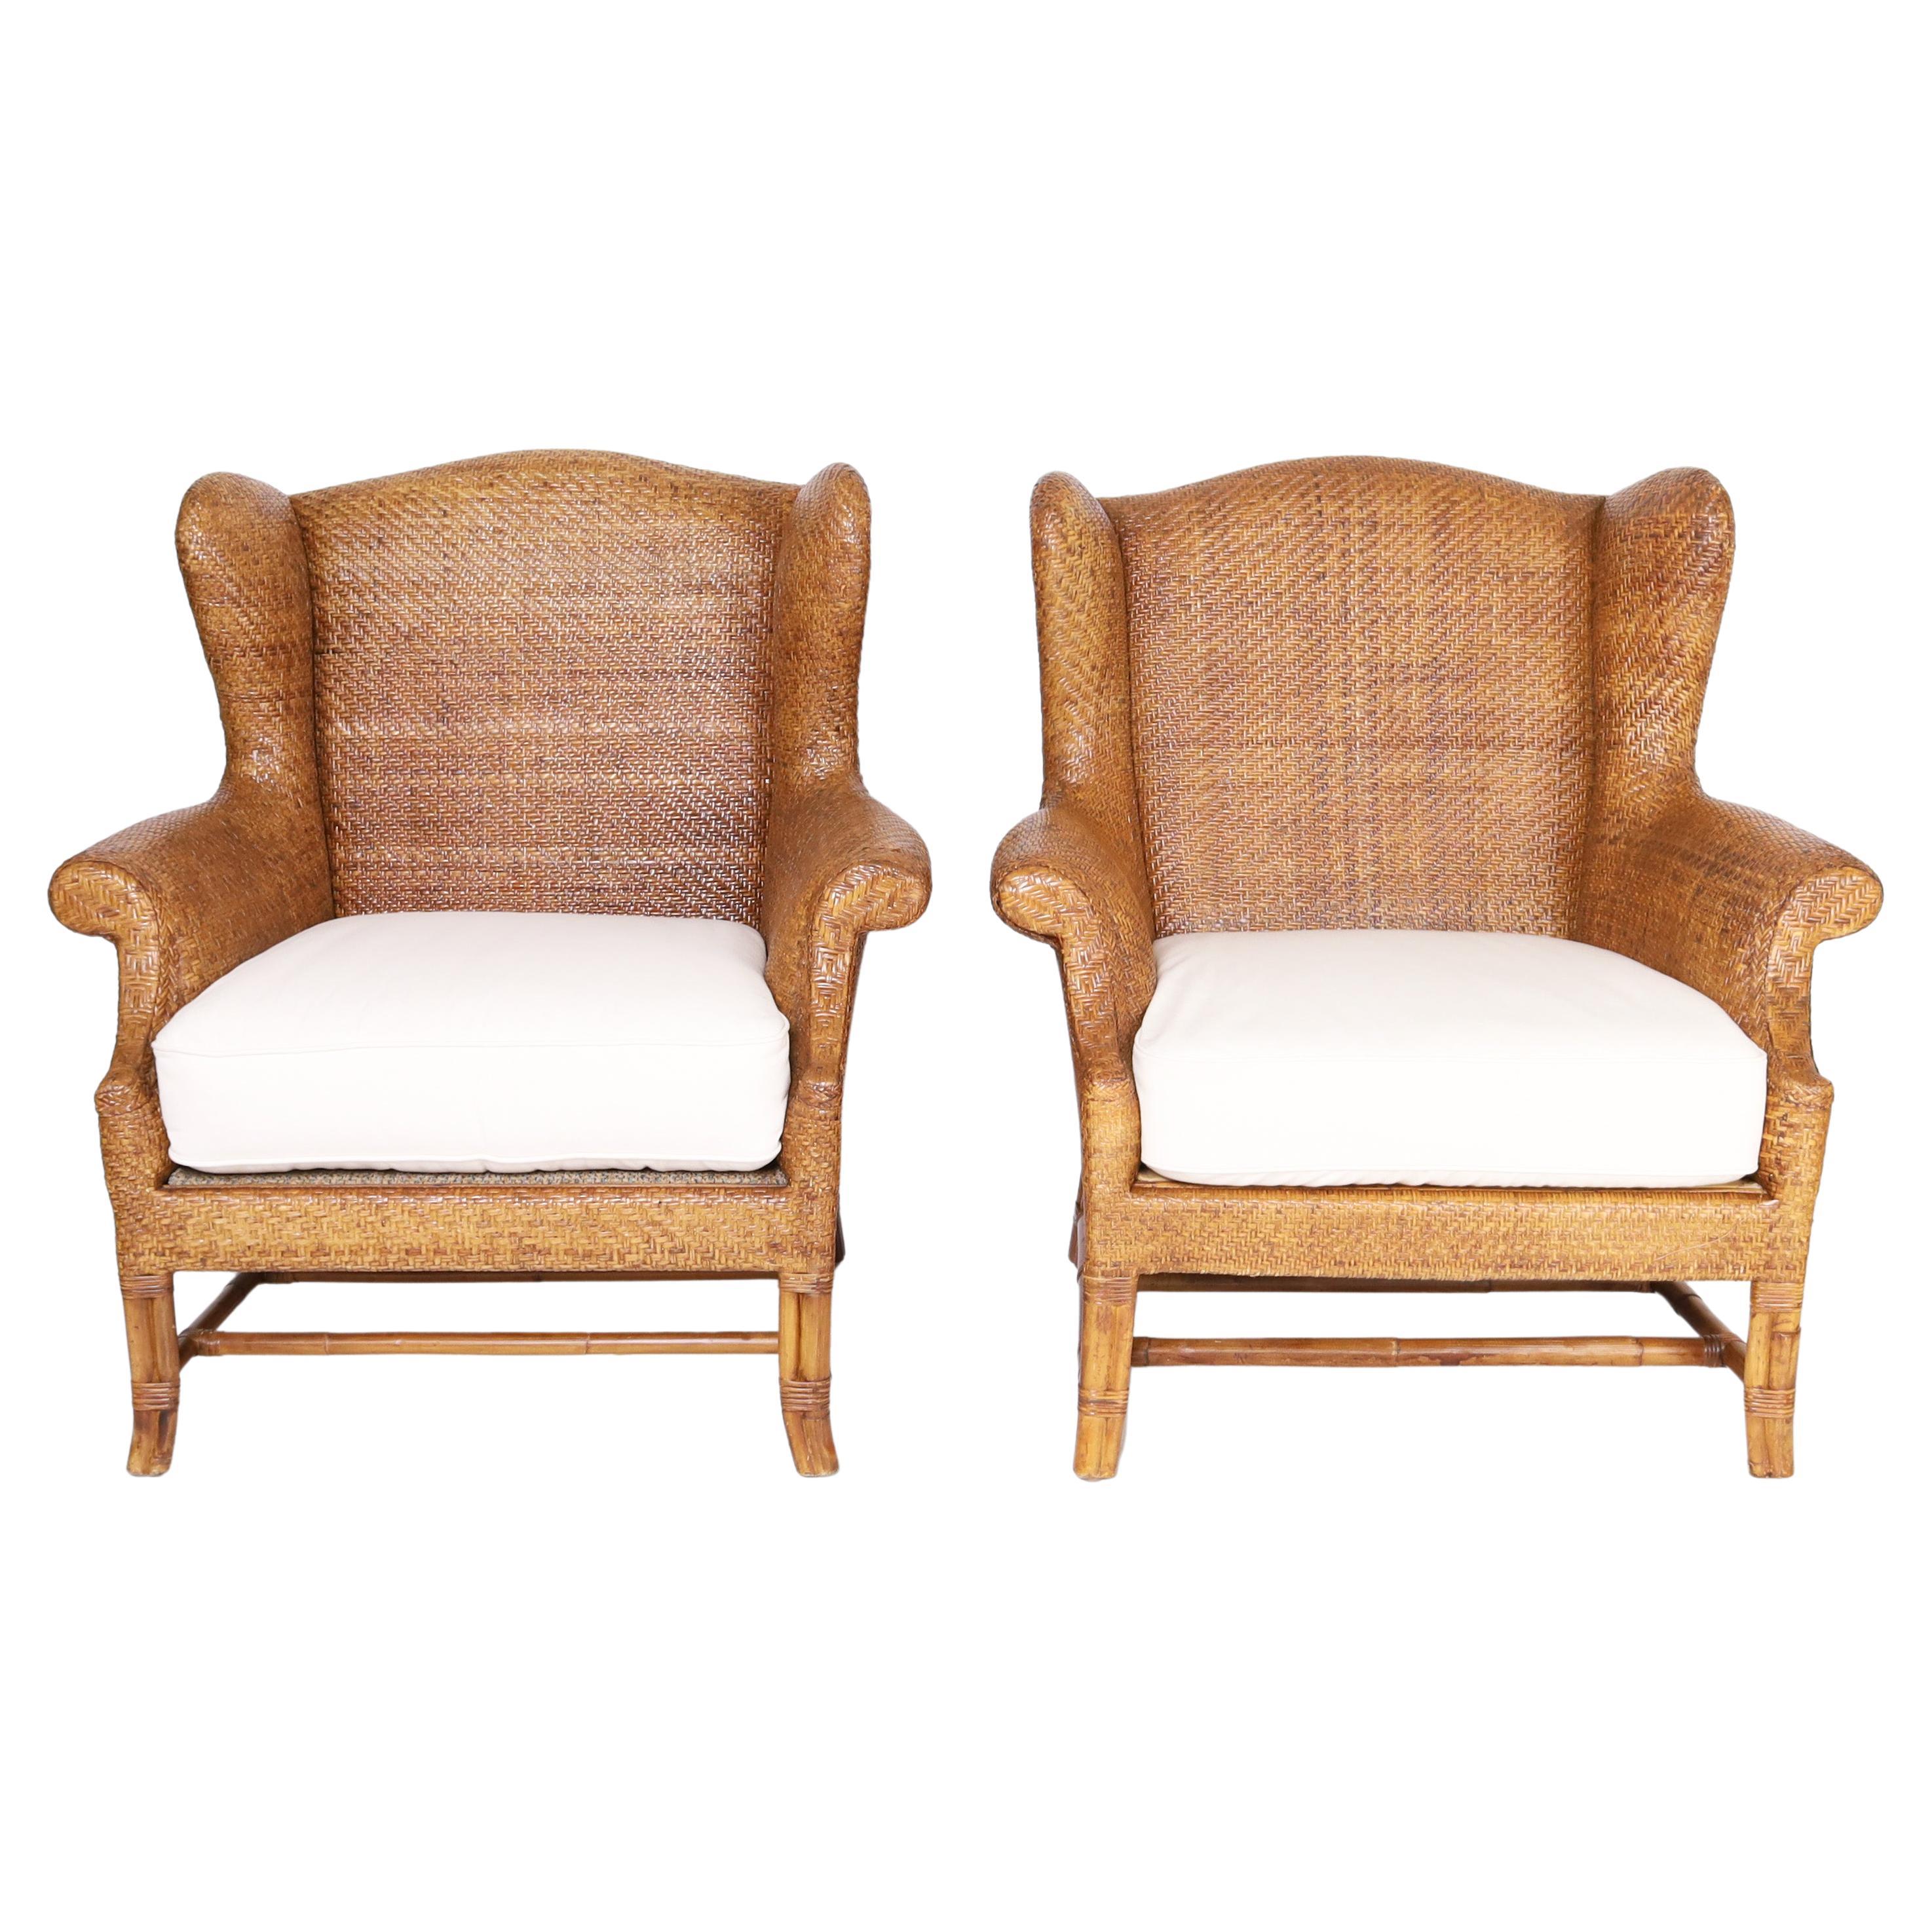 Handsome pair of British Colonial style wingback armchairs crafted with woven reed, in a herringbone pattern over classic form with bamboo legs and stretchers. Signed Milling Road for Baker.

